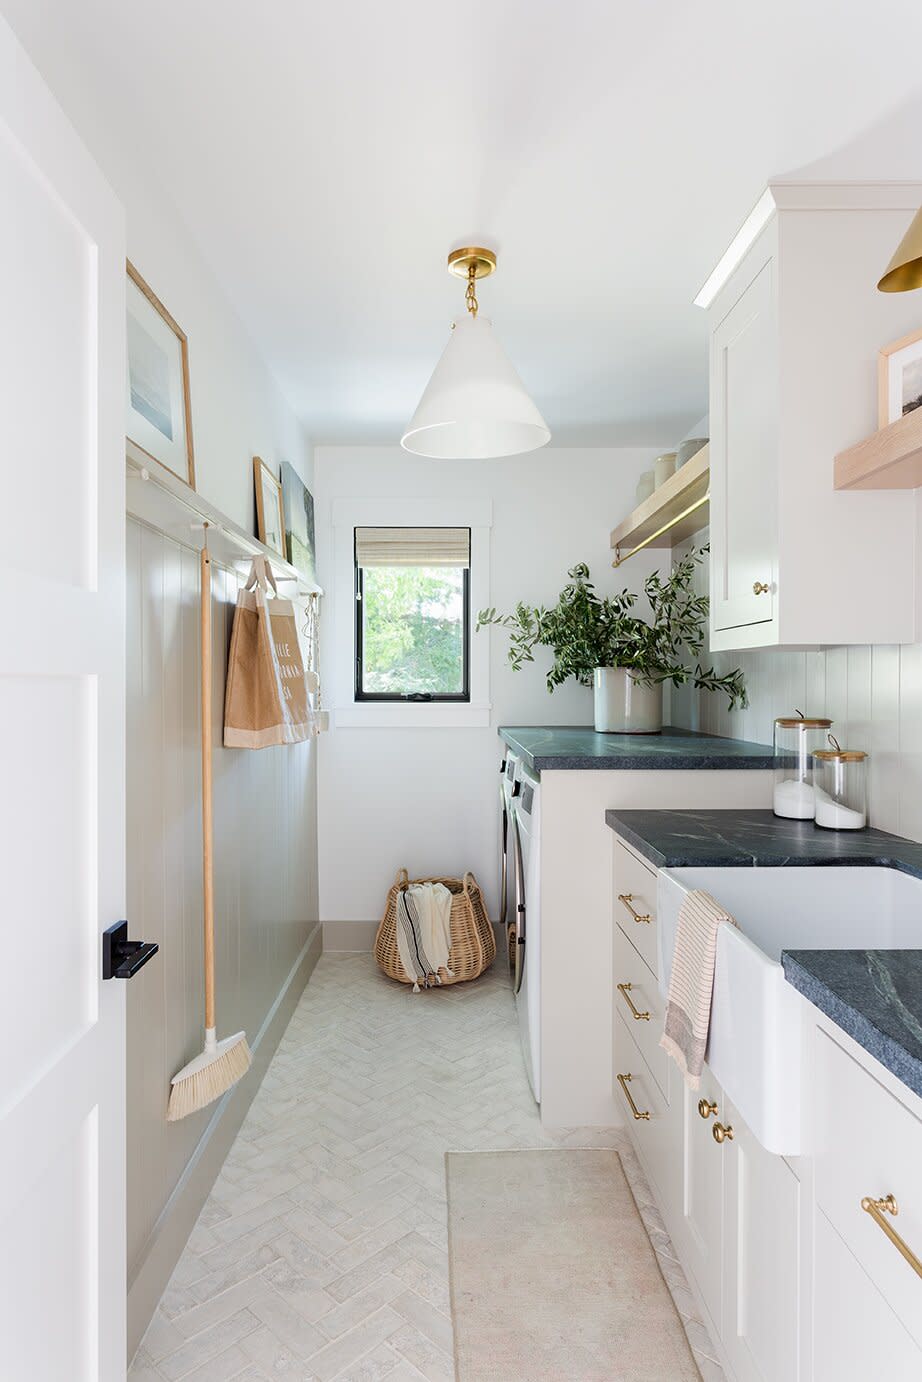 laundry room with off-white cabinets, dark stone counters, and brass hardware